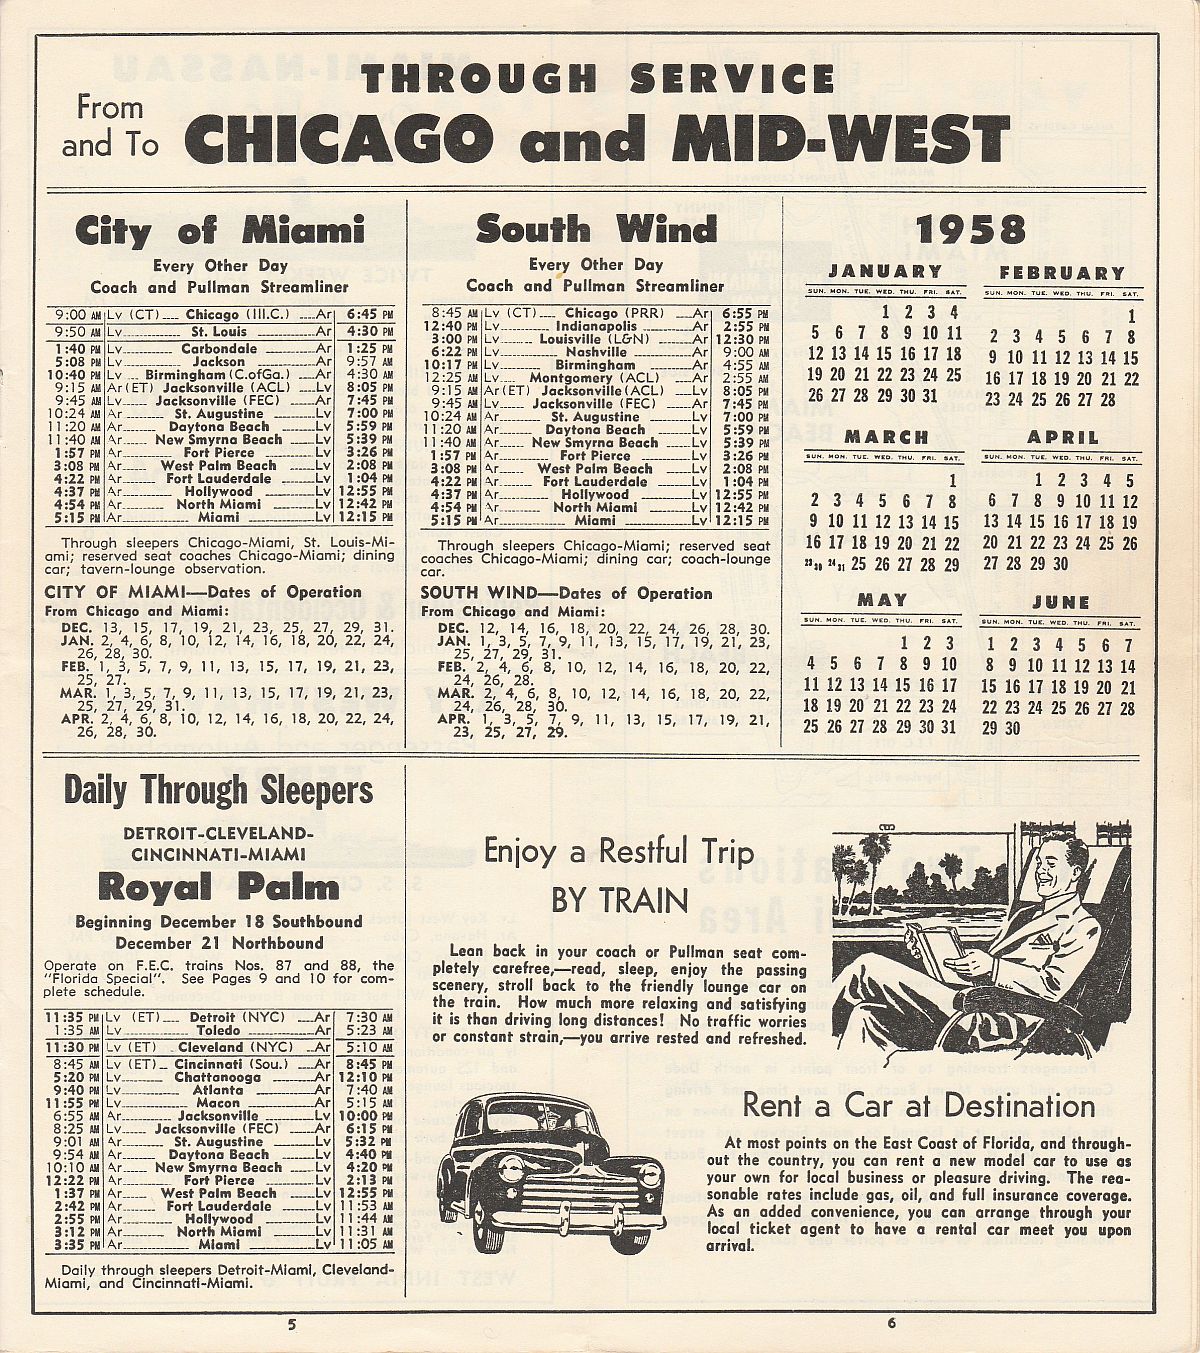 Florida East Coast Railway Dec. 12, 1957 timetable Pg. 5-6: Through service from & to Chicago and Mid-West Featuring City of Miami, South Wind & Royal Palm; Ad: Rent a car